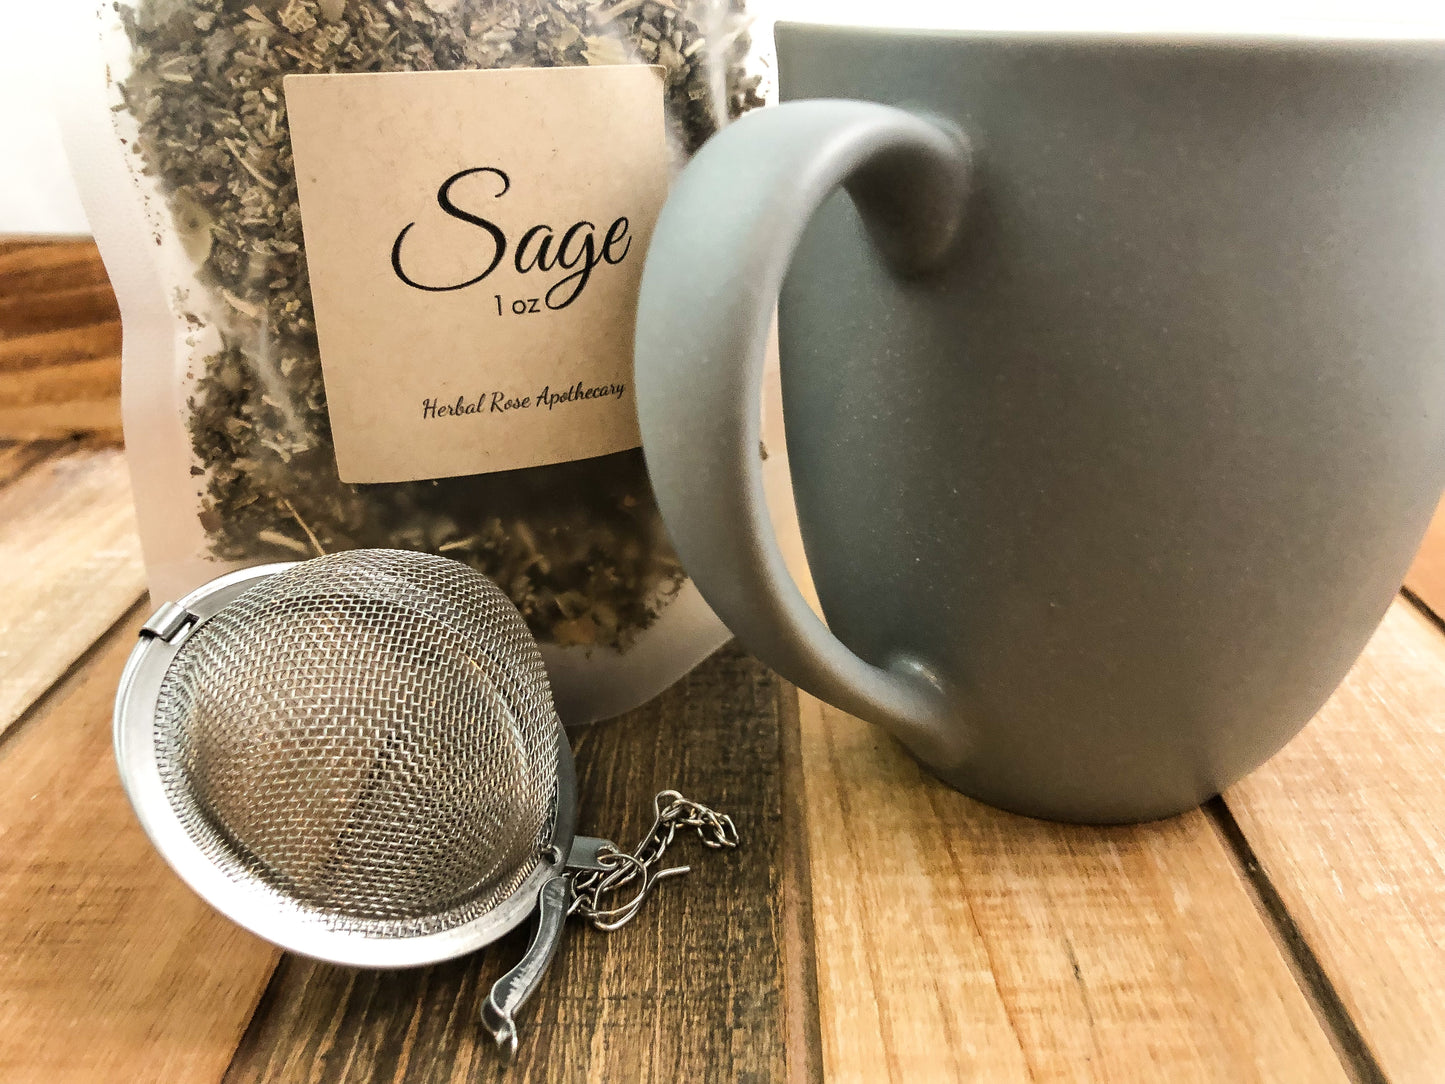 image of dried sage in a 1oz clear bag next to a grey coffee mug and mesh tea infuser on a wooden table with white background